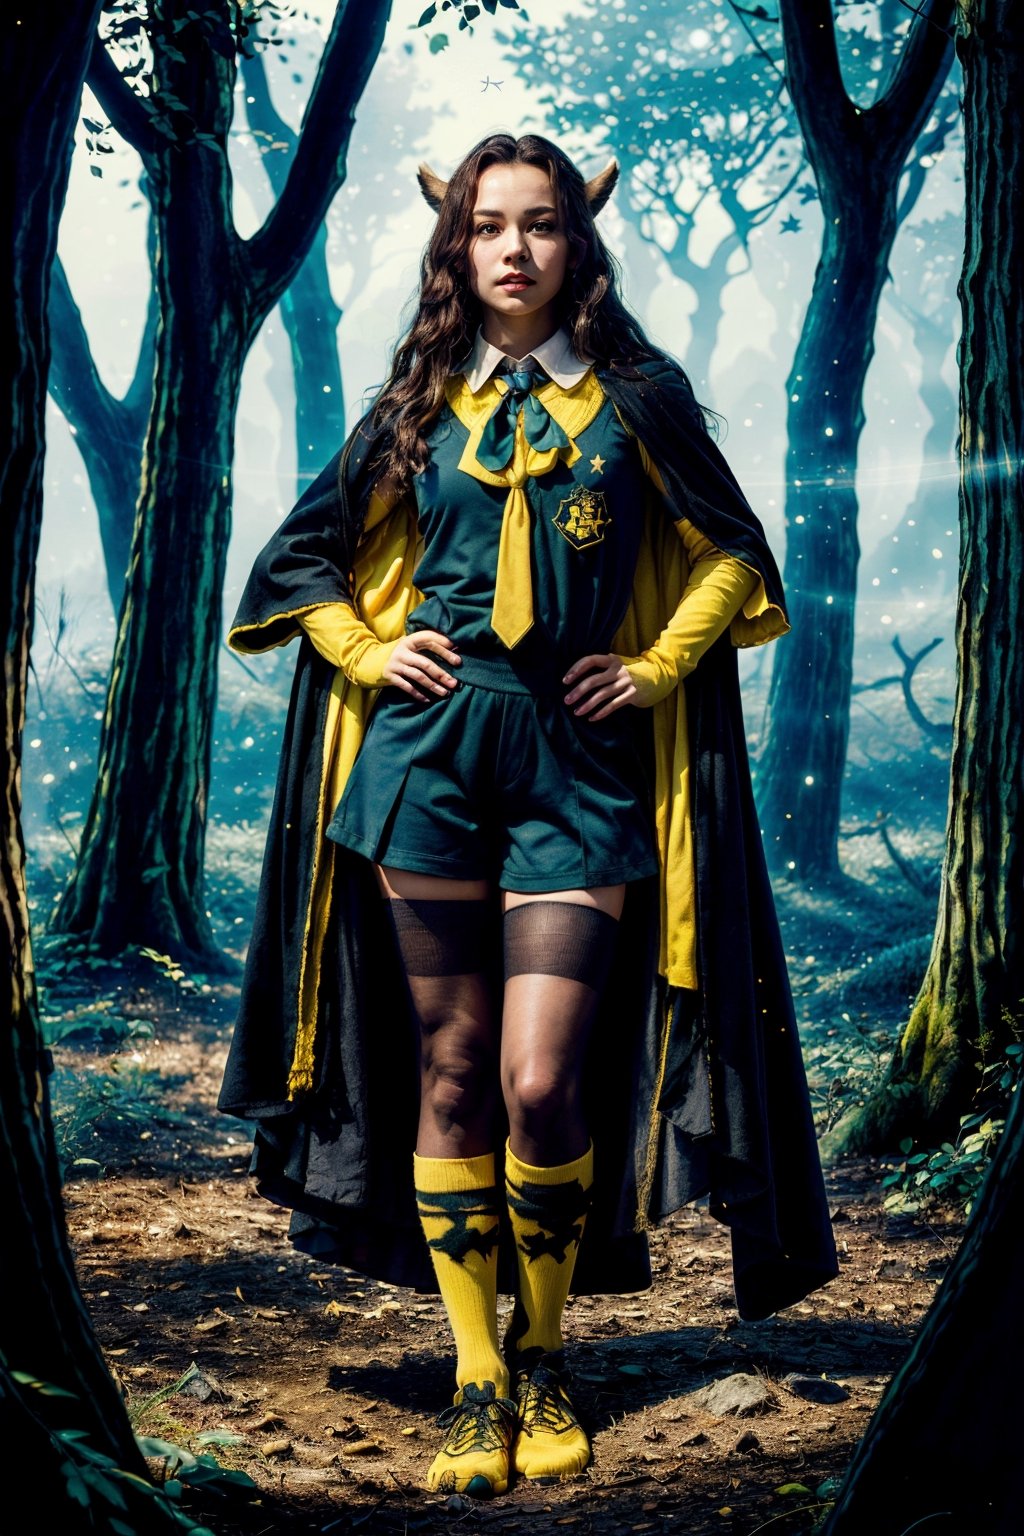 Hogwarts Hufflepuff student, magical forest with on the background, the girl is playing with magic animals, 8k quality, her school uniform is yellow vest, black long shorts, long yellow socks, black and yellow long cloak with Huffelpuff sign, green eyes, long straight light brown hair, the image must be striking and high impact, magic photo style, the woman should have an elegant and cunning appearance, the background must be dark and magic, night and magic atmosphere, the image must have 8k resolution and a high level of detail, full body, (artistic pose of a woman),mgln